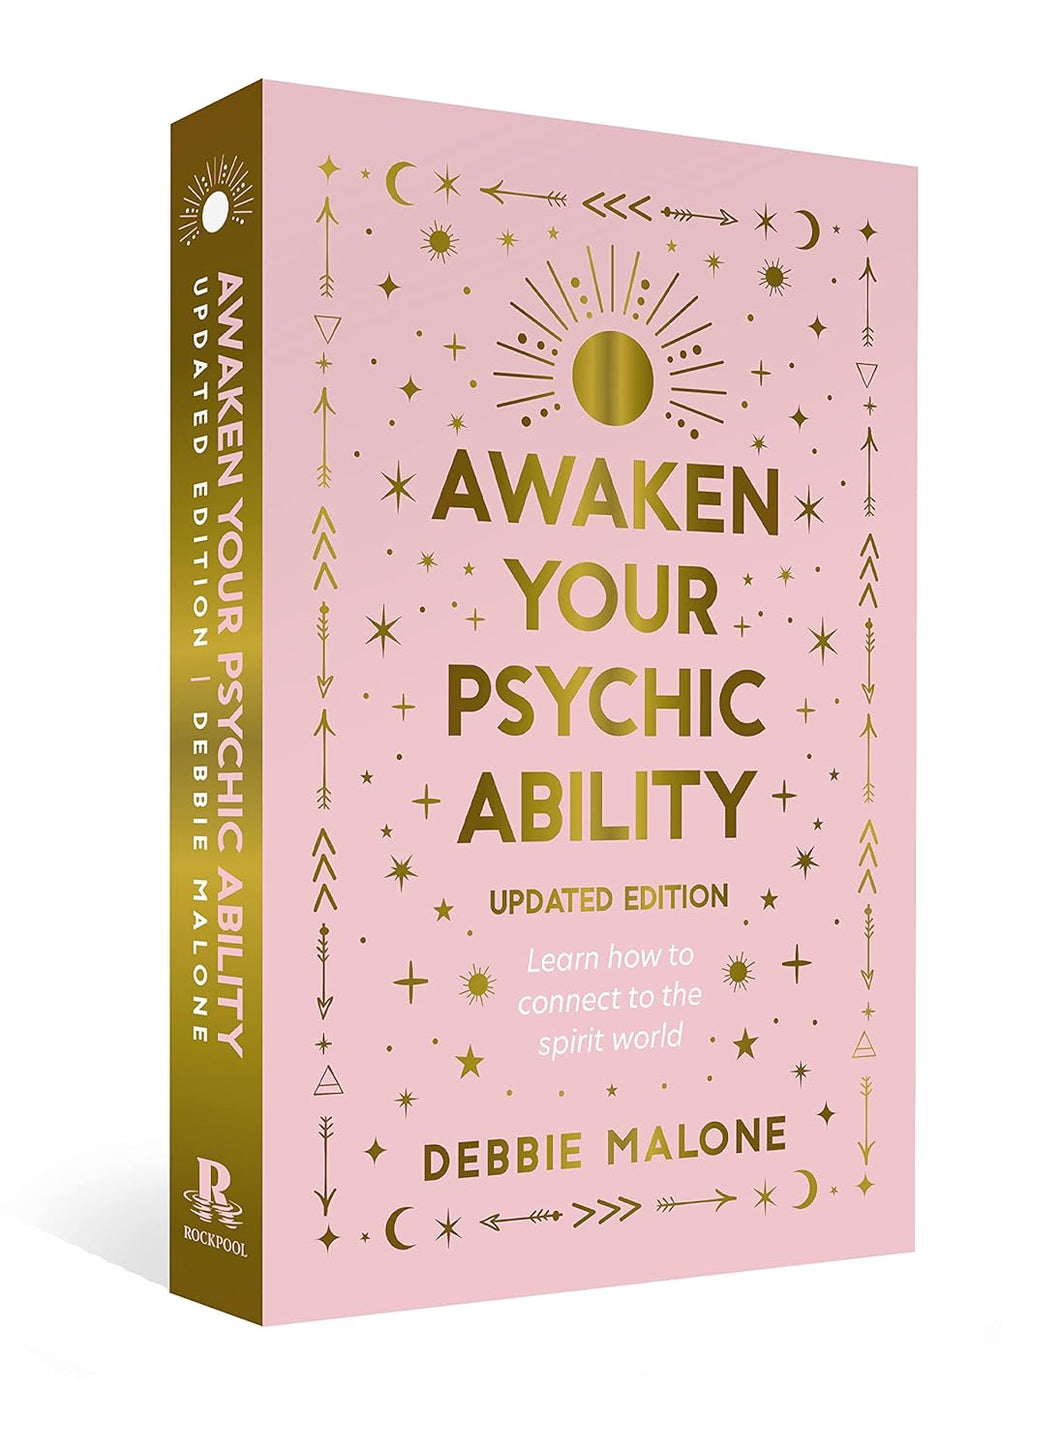 Awaken your Psychic Ability: Learn How to Connect to the Spirit World